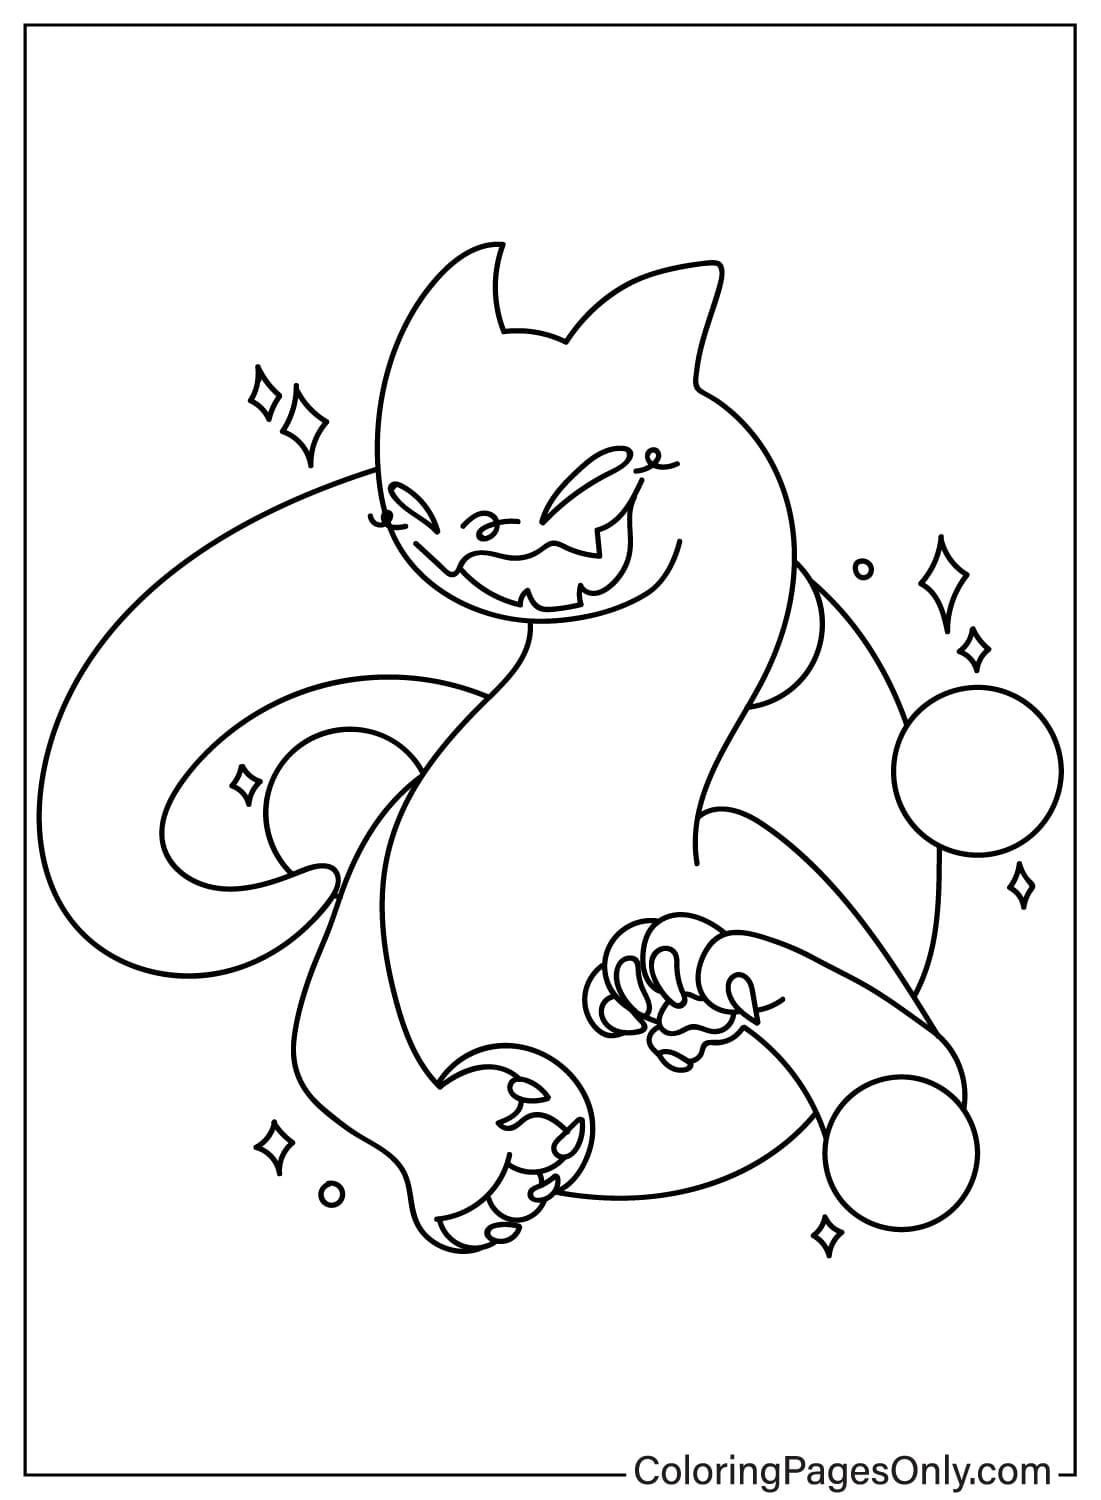 Ghazt Coloring Pages to Printable from Ghazt